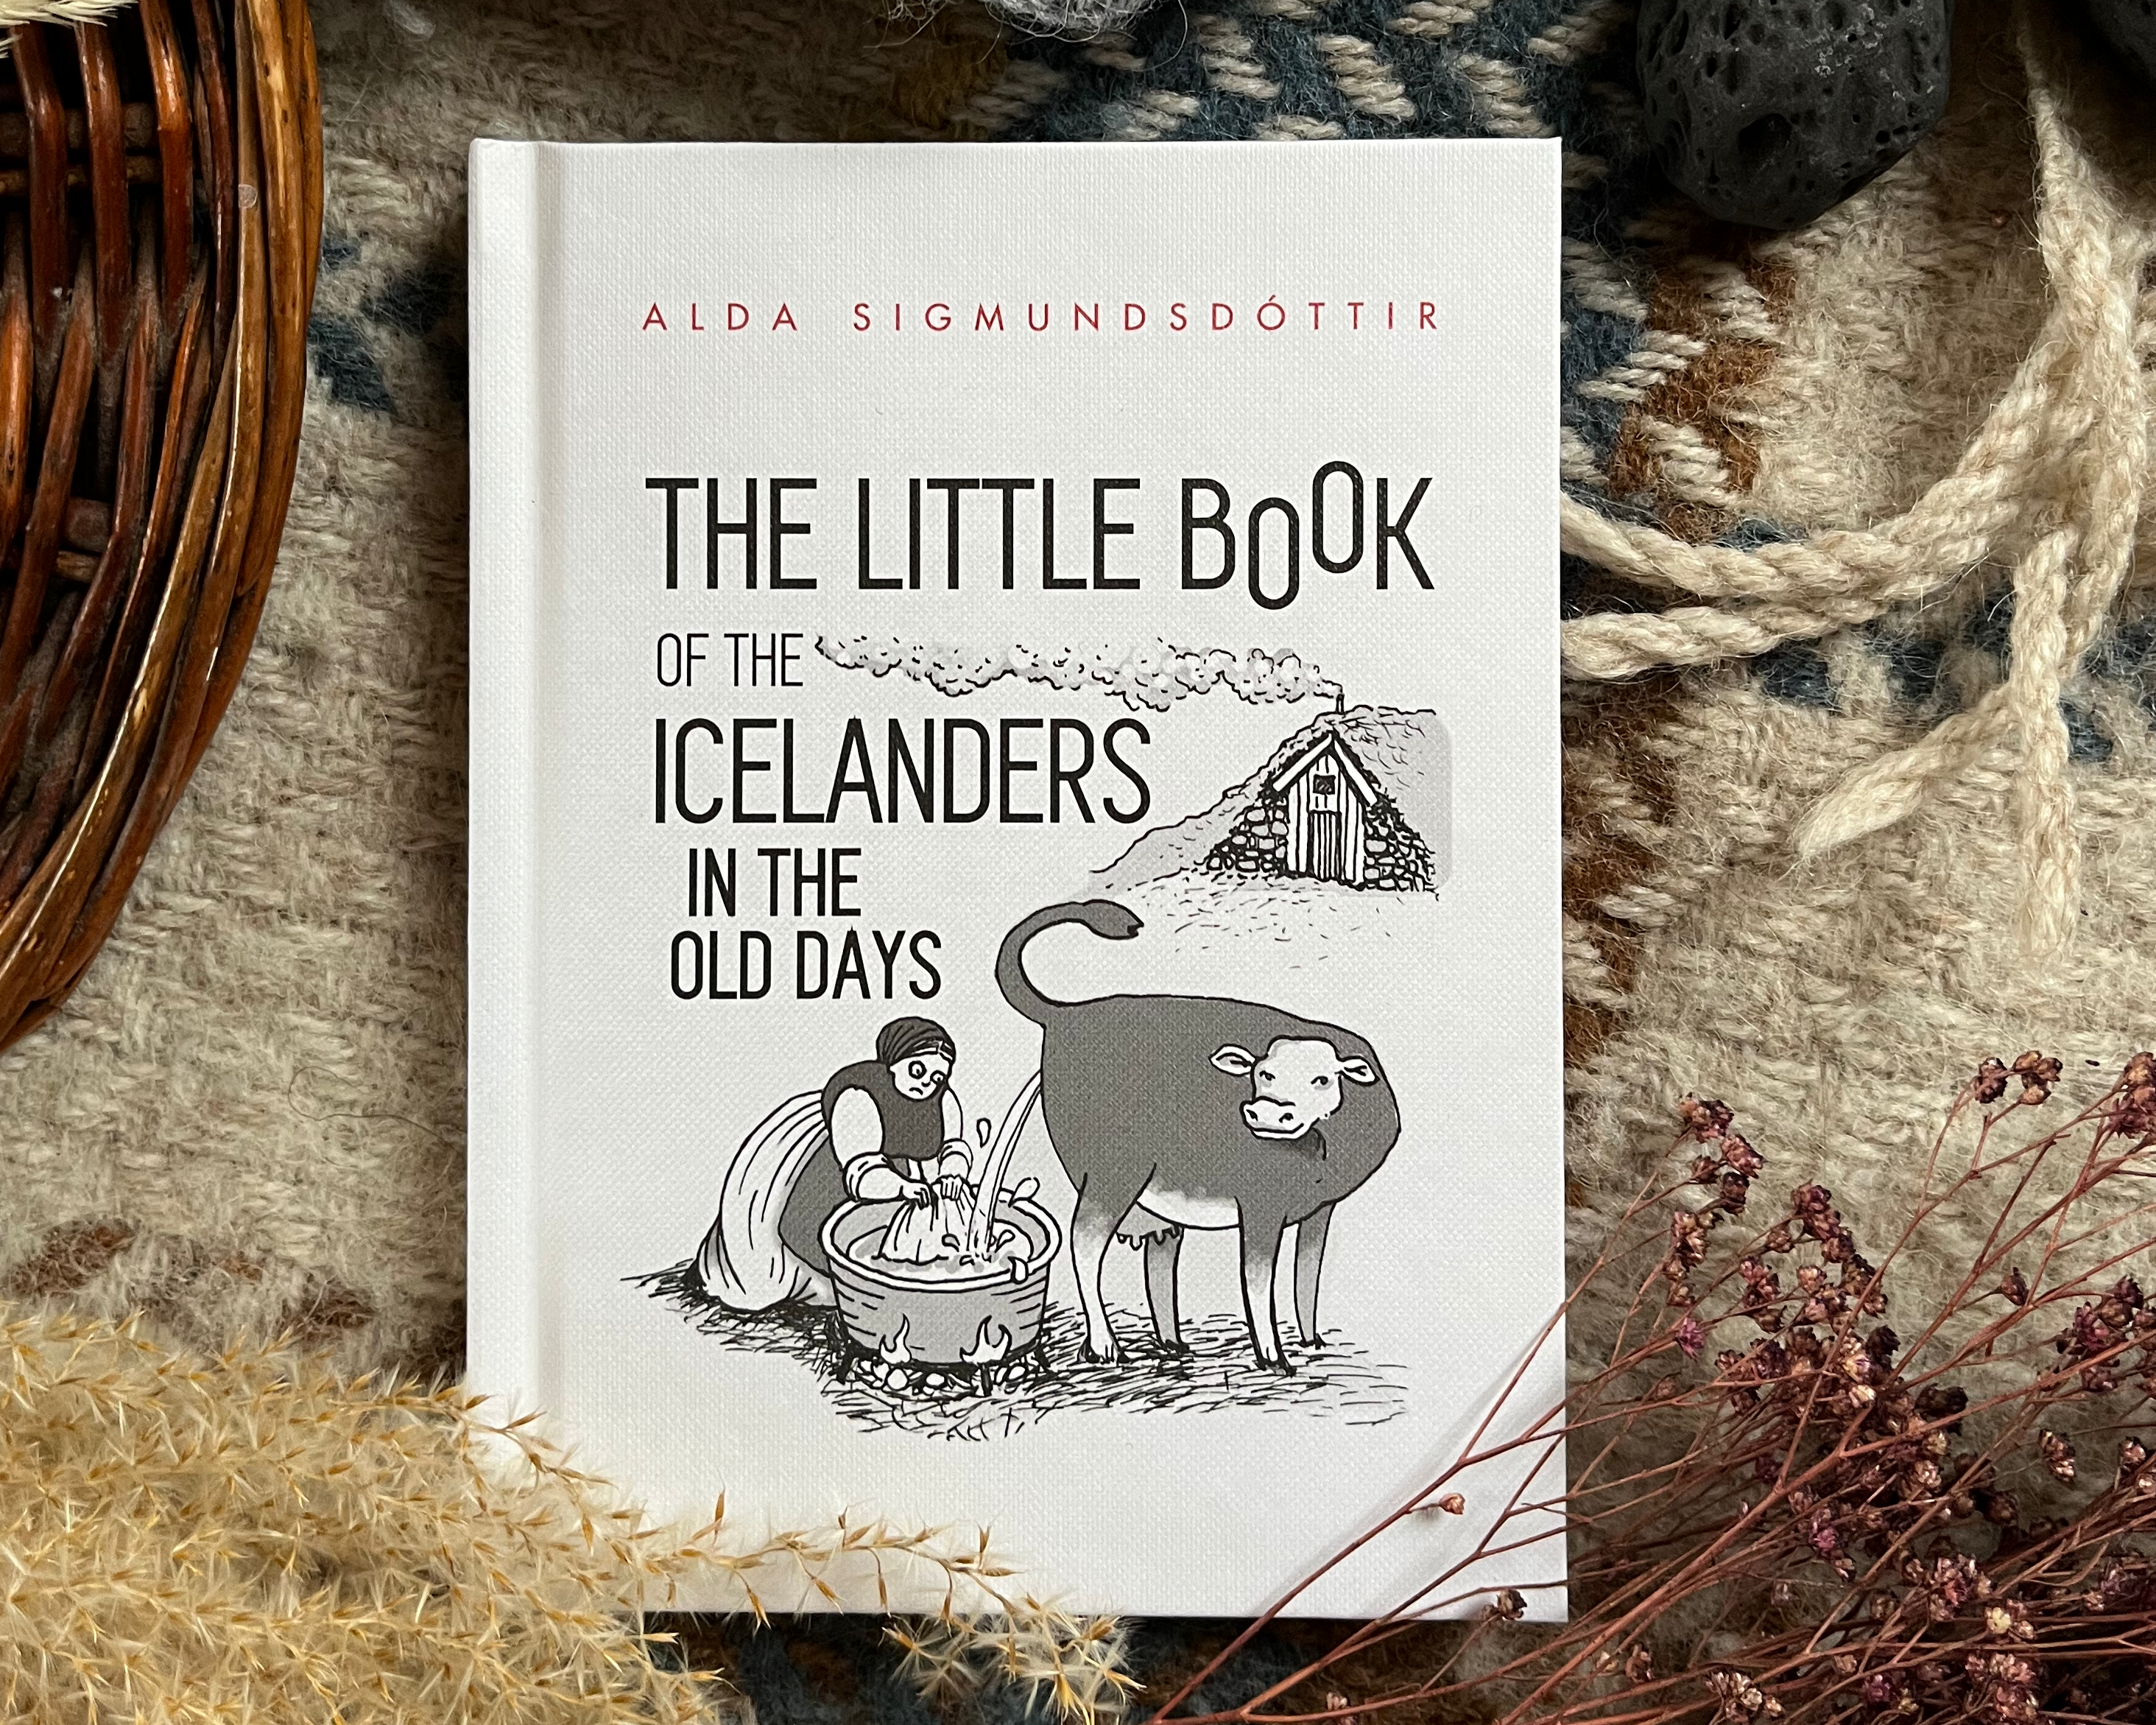 Two copies of The Little Book of the Icelanders in the Old Days lying on a table next to a plant